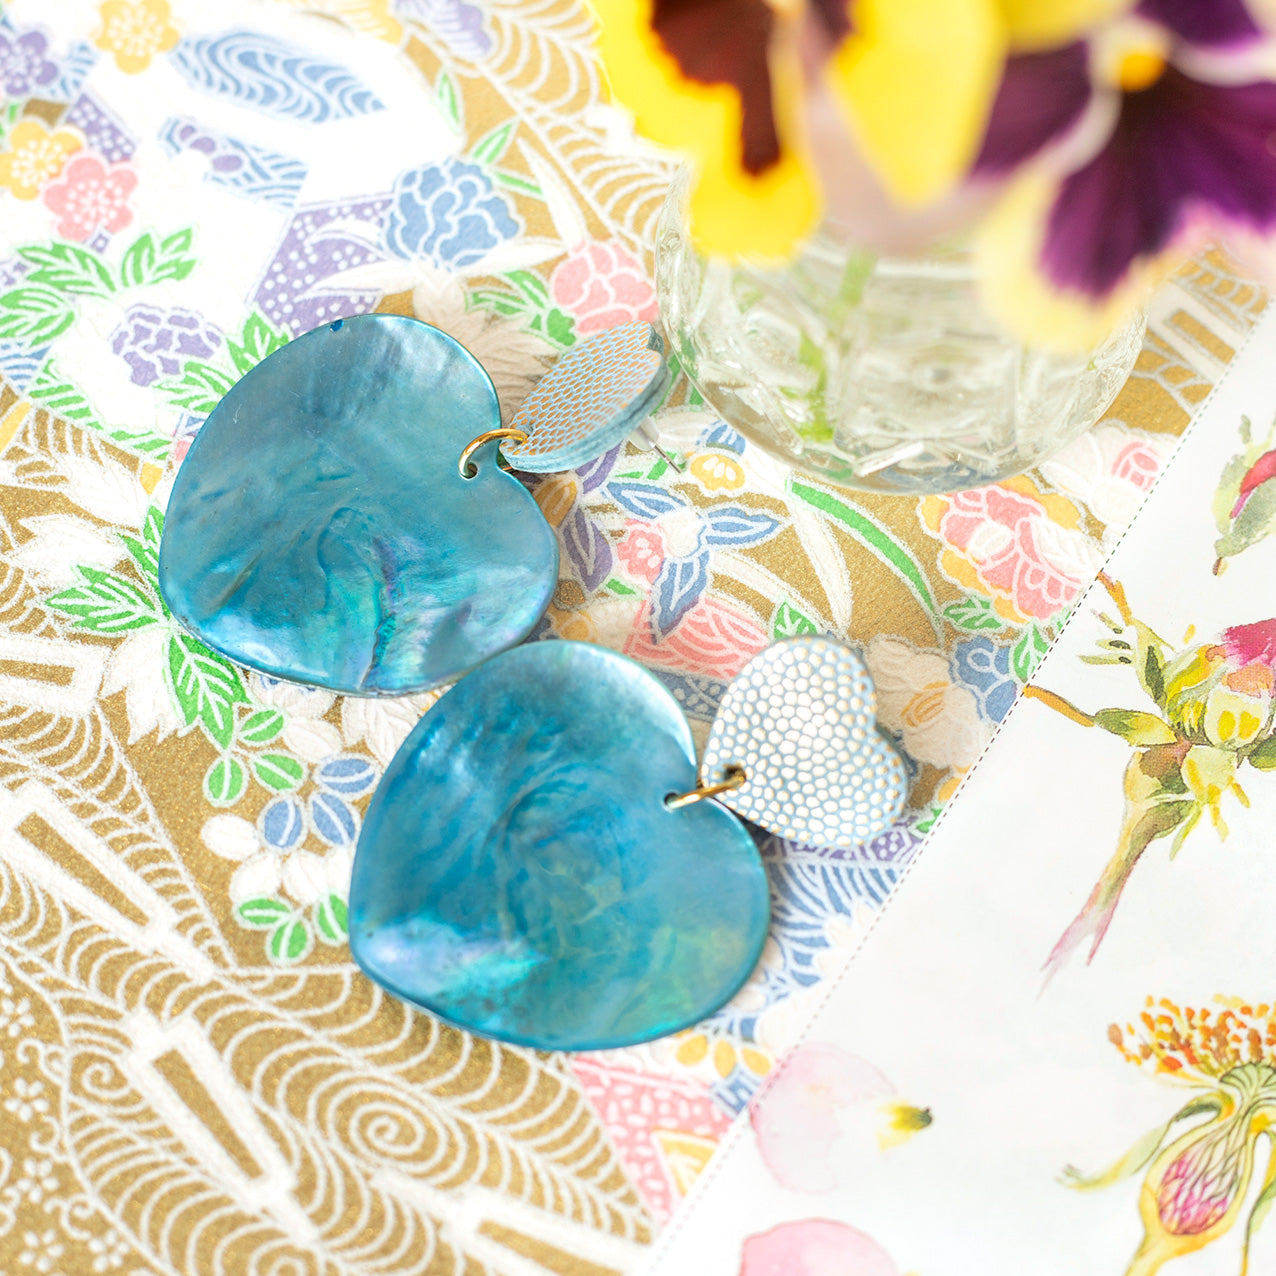 Double Hearts earrings in blue leather with gold polka dots and blue mother-of-pearl hearts